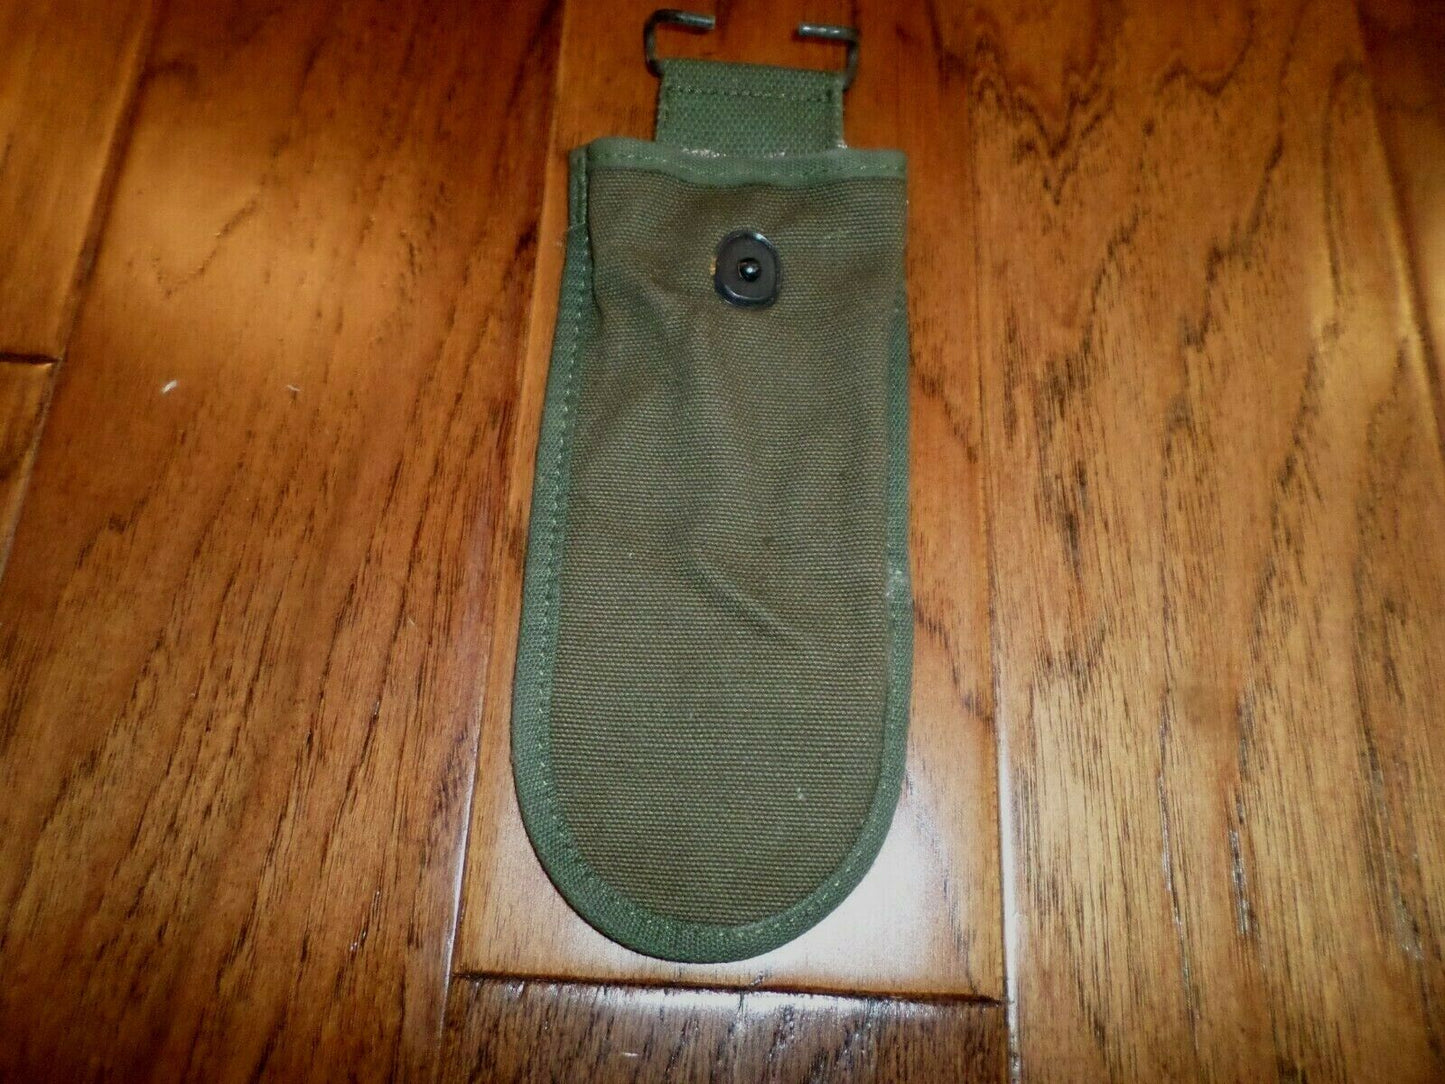 U.S Army Vintage Issue Green Canvas Belt Pouch For Wire Cutters M-1938 Style